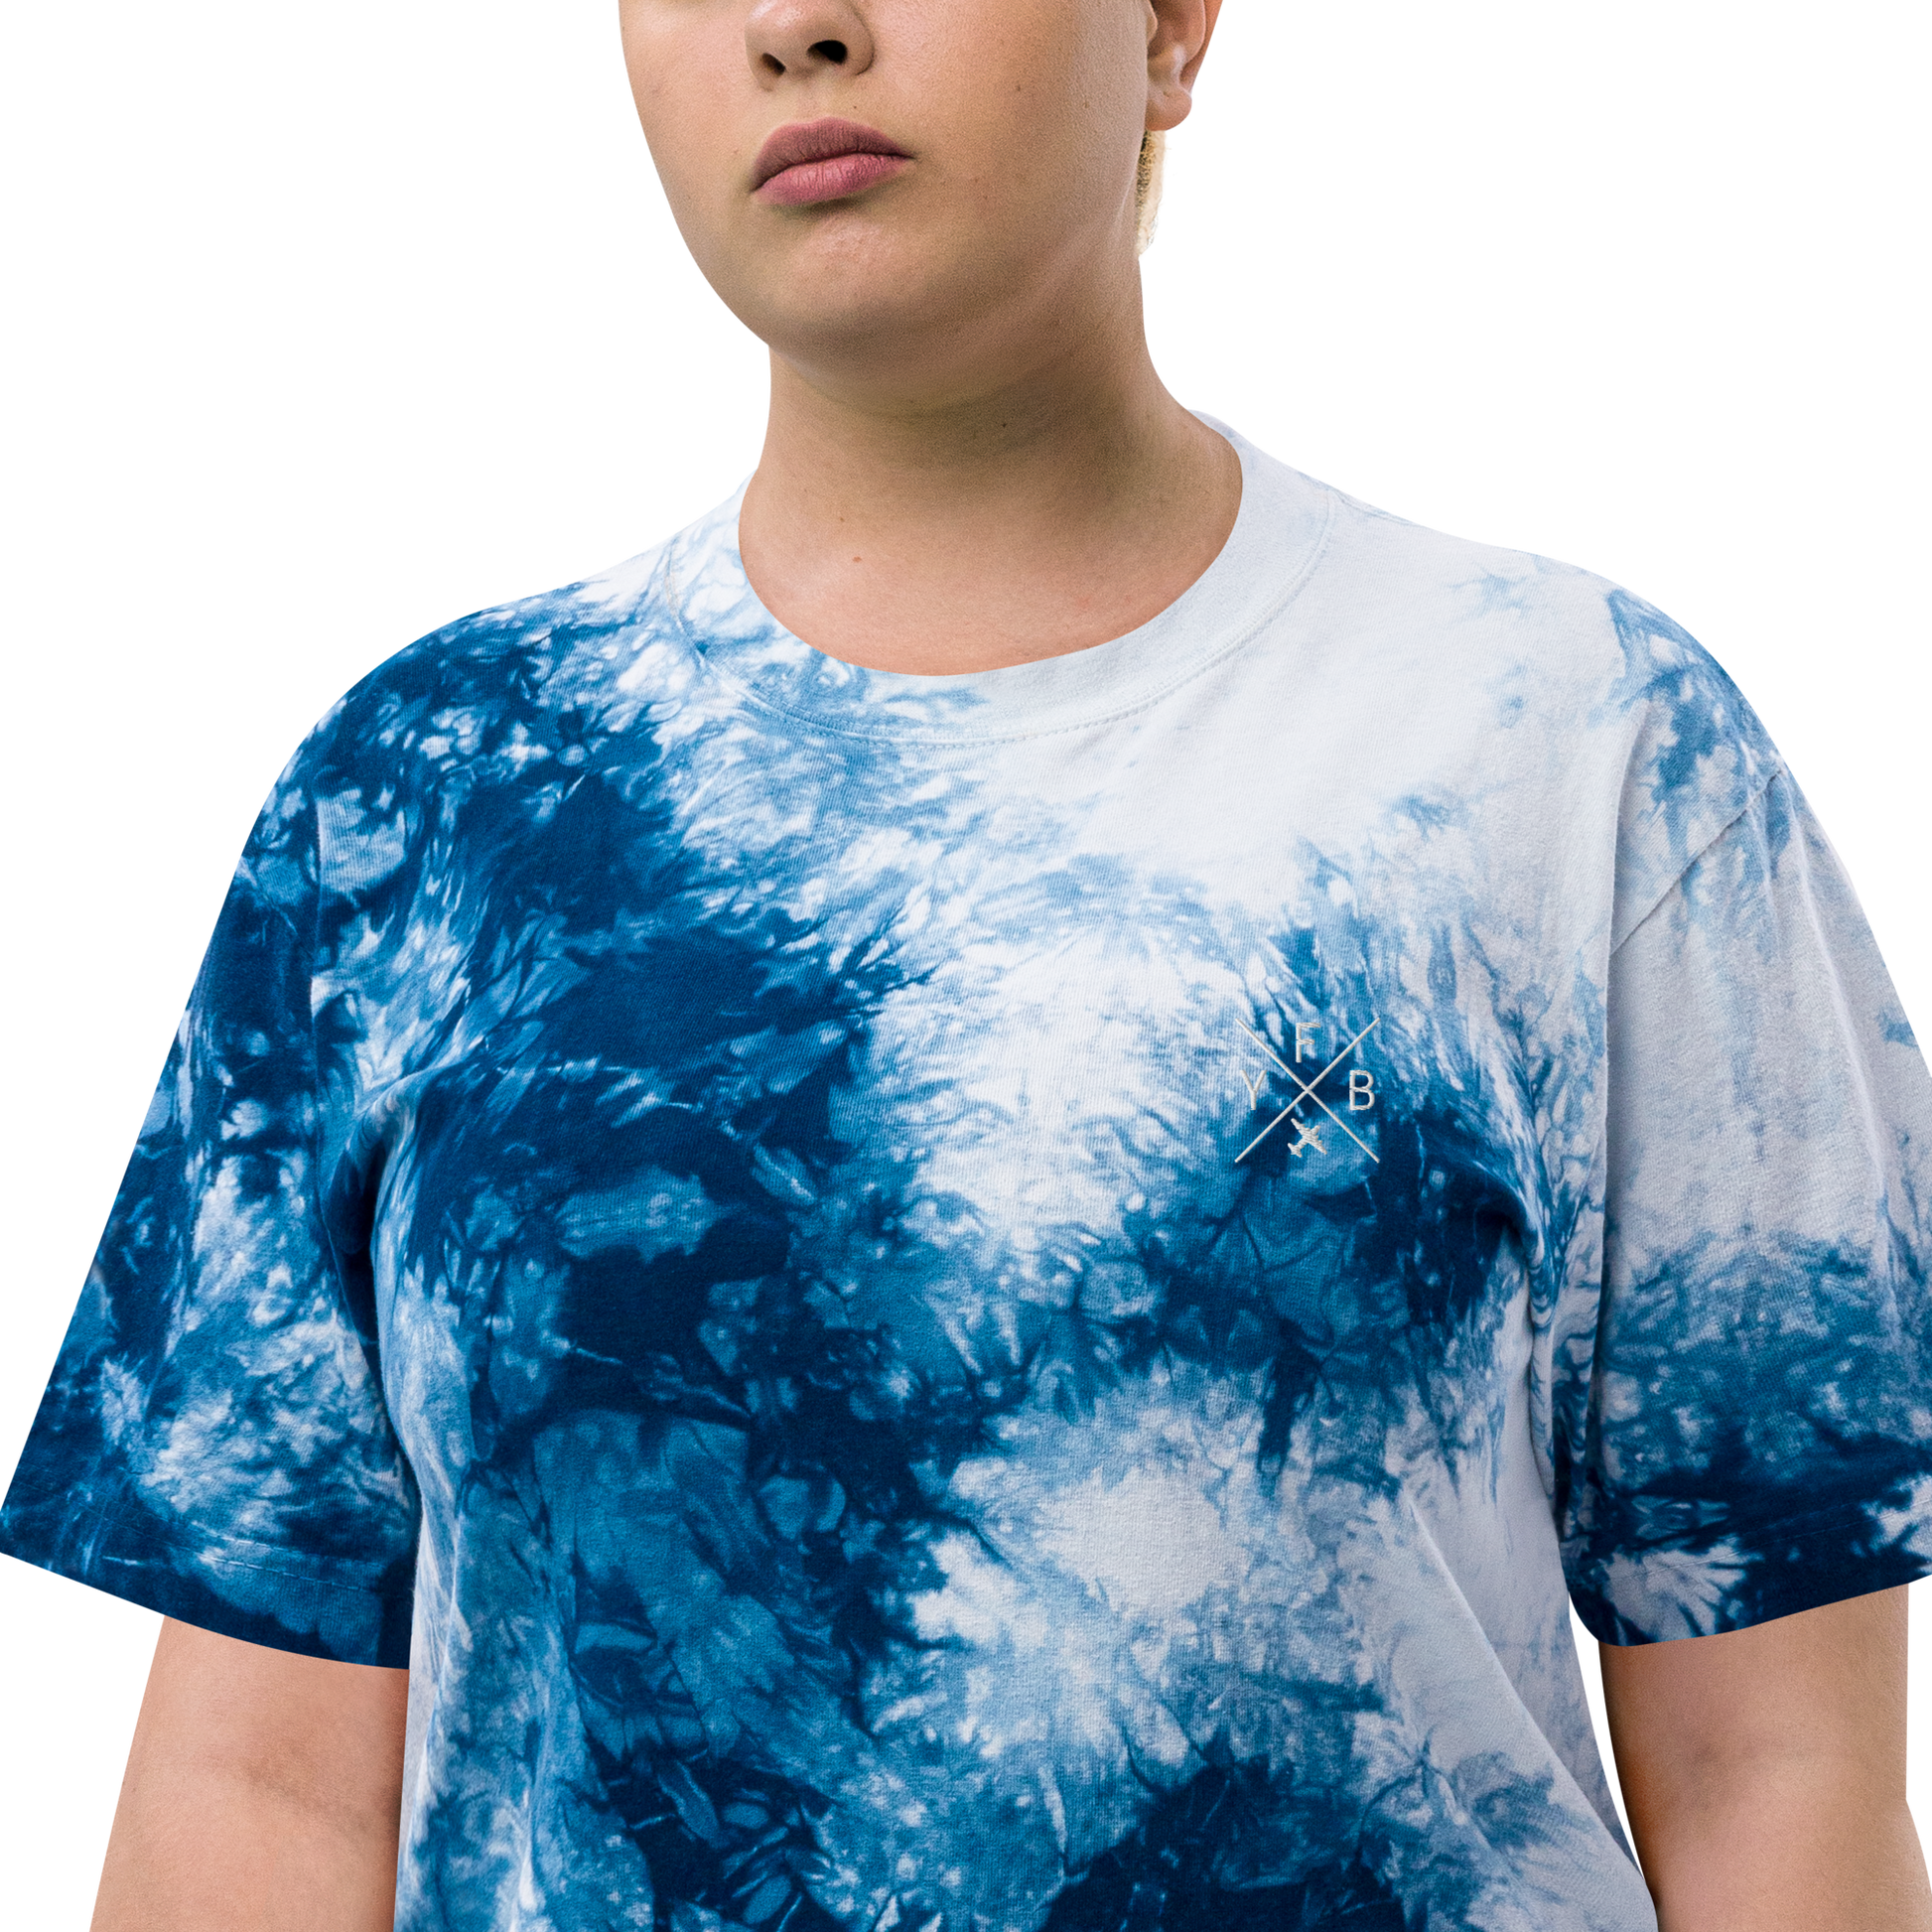 YHM Designs - YFB Iqaluit Oversized Tie-Dye T-Shirt - Crossed-X Design with Airport Code and Vintage Propliner - White Embroidery - Image 10